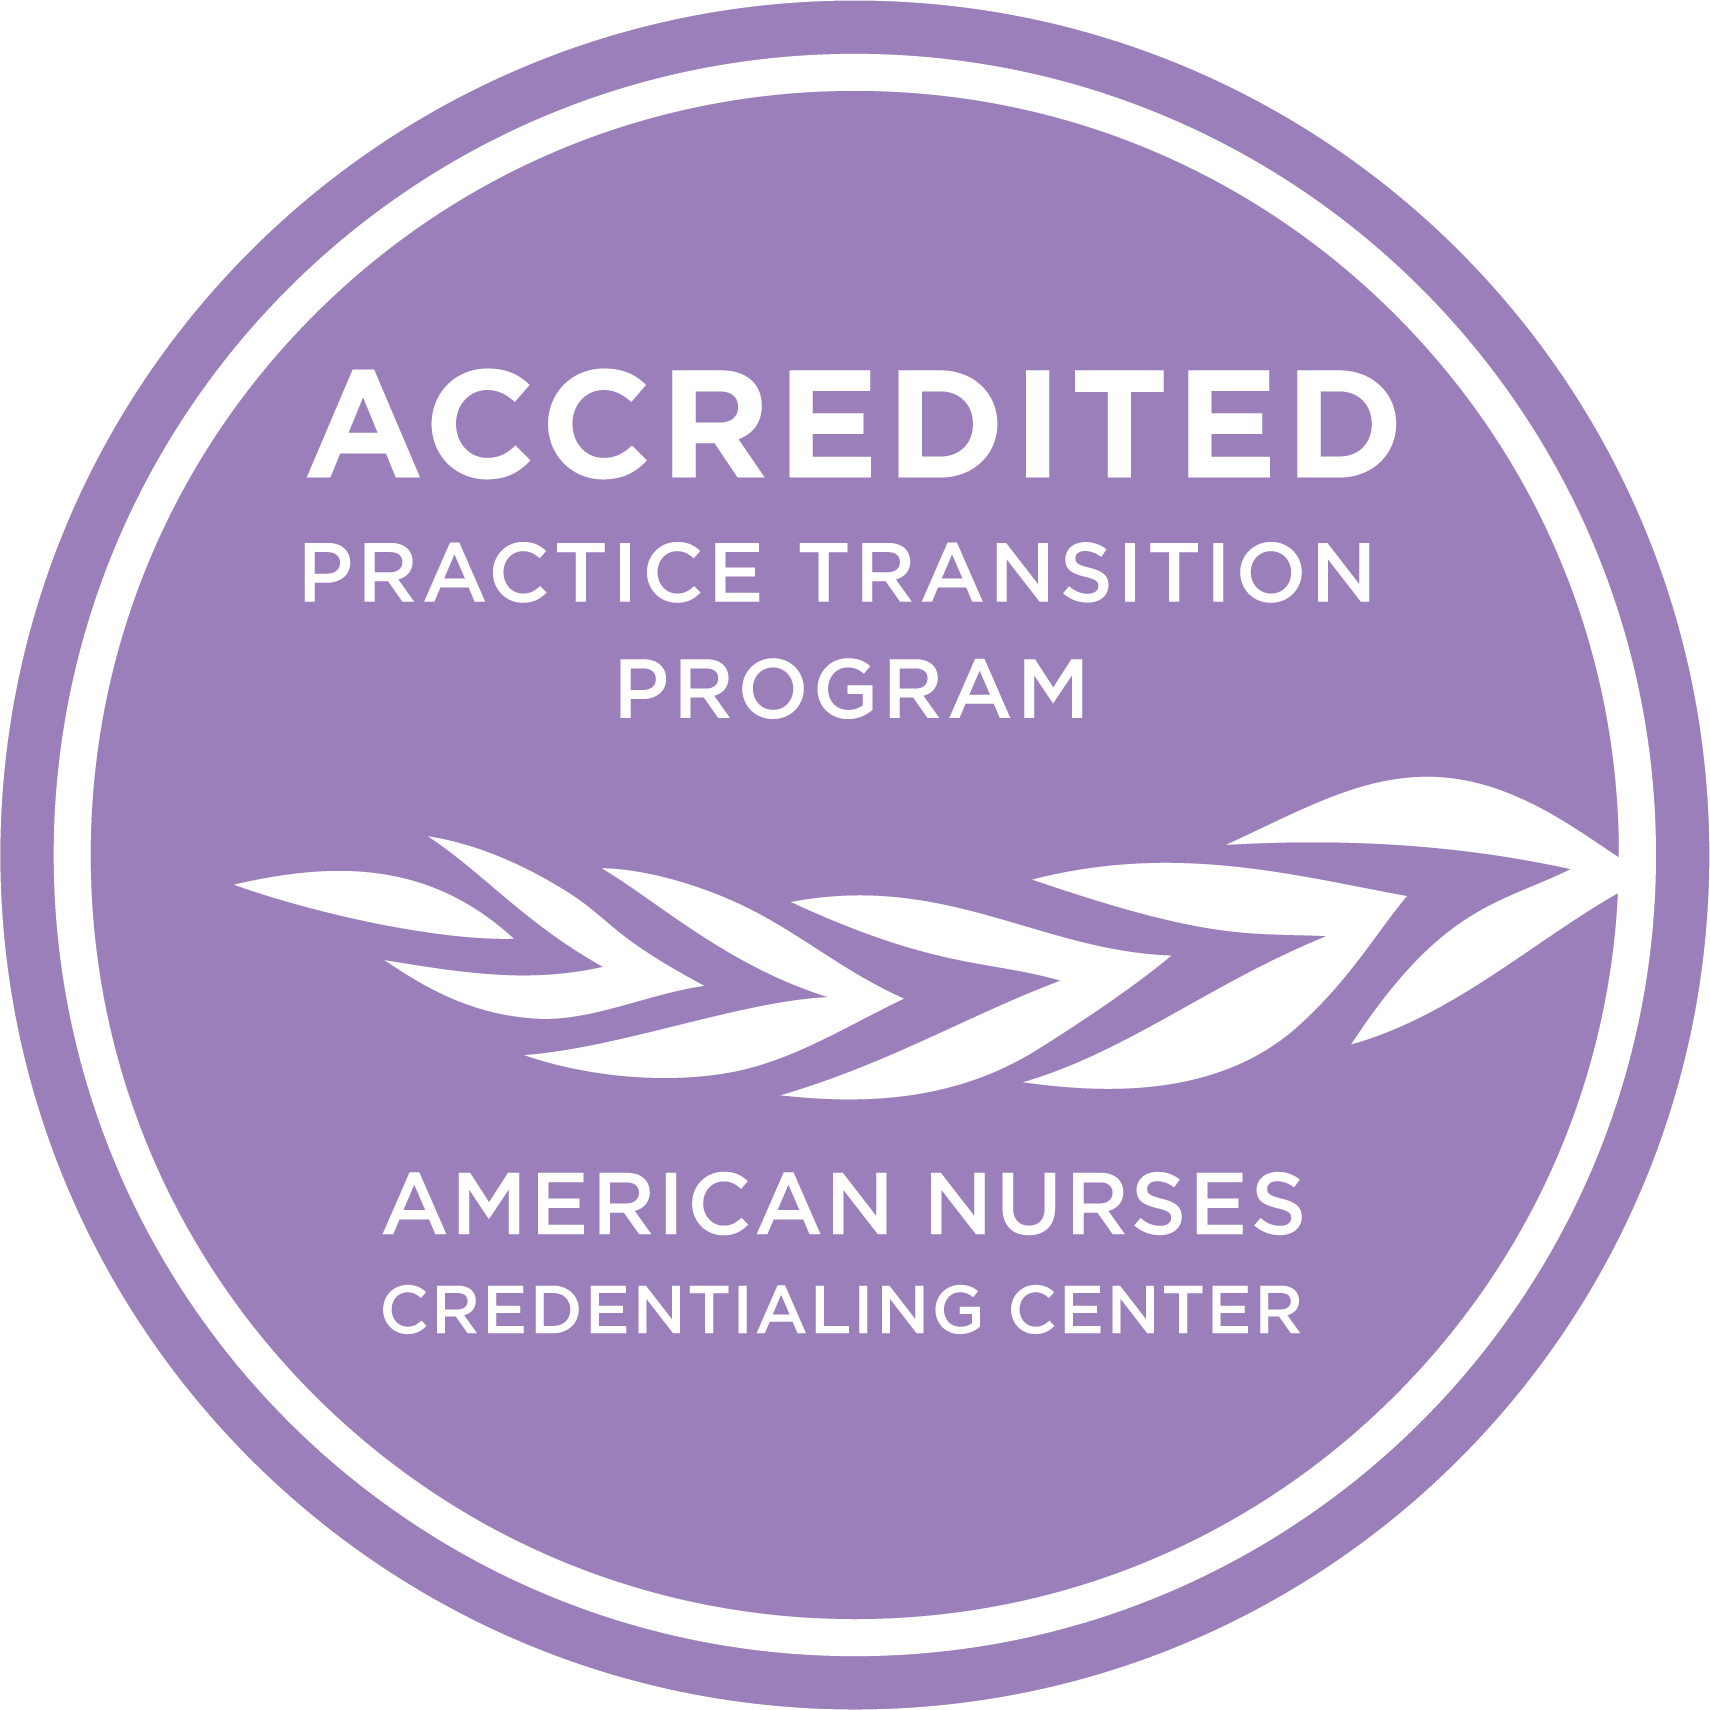 Accredited practice transition program